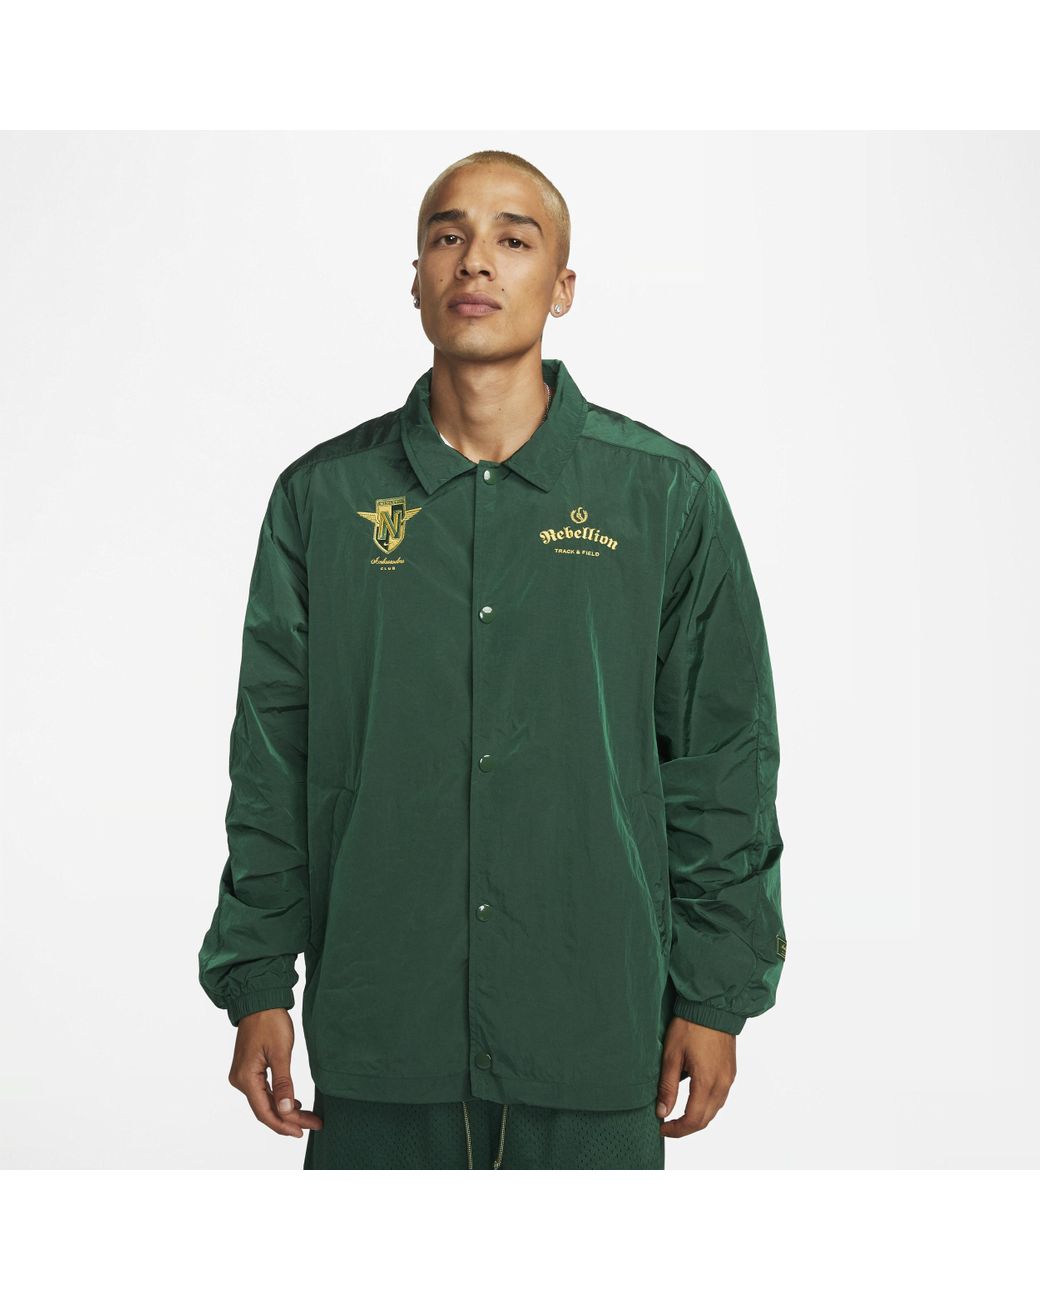 Nike Coaches Jacket In Green, for Men | Lyst